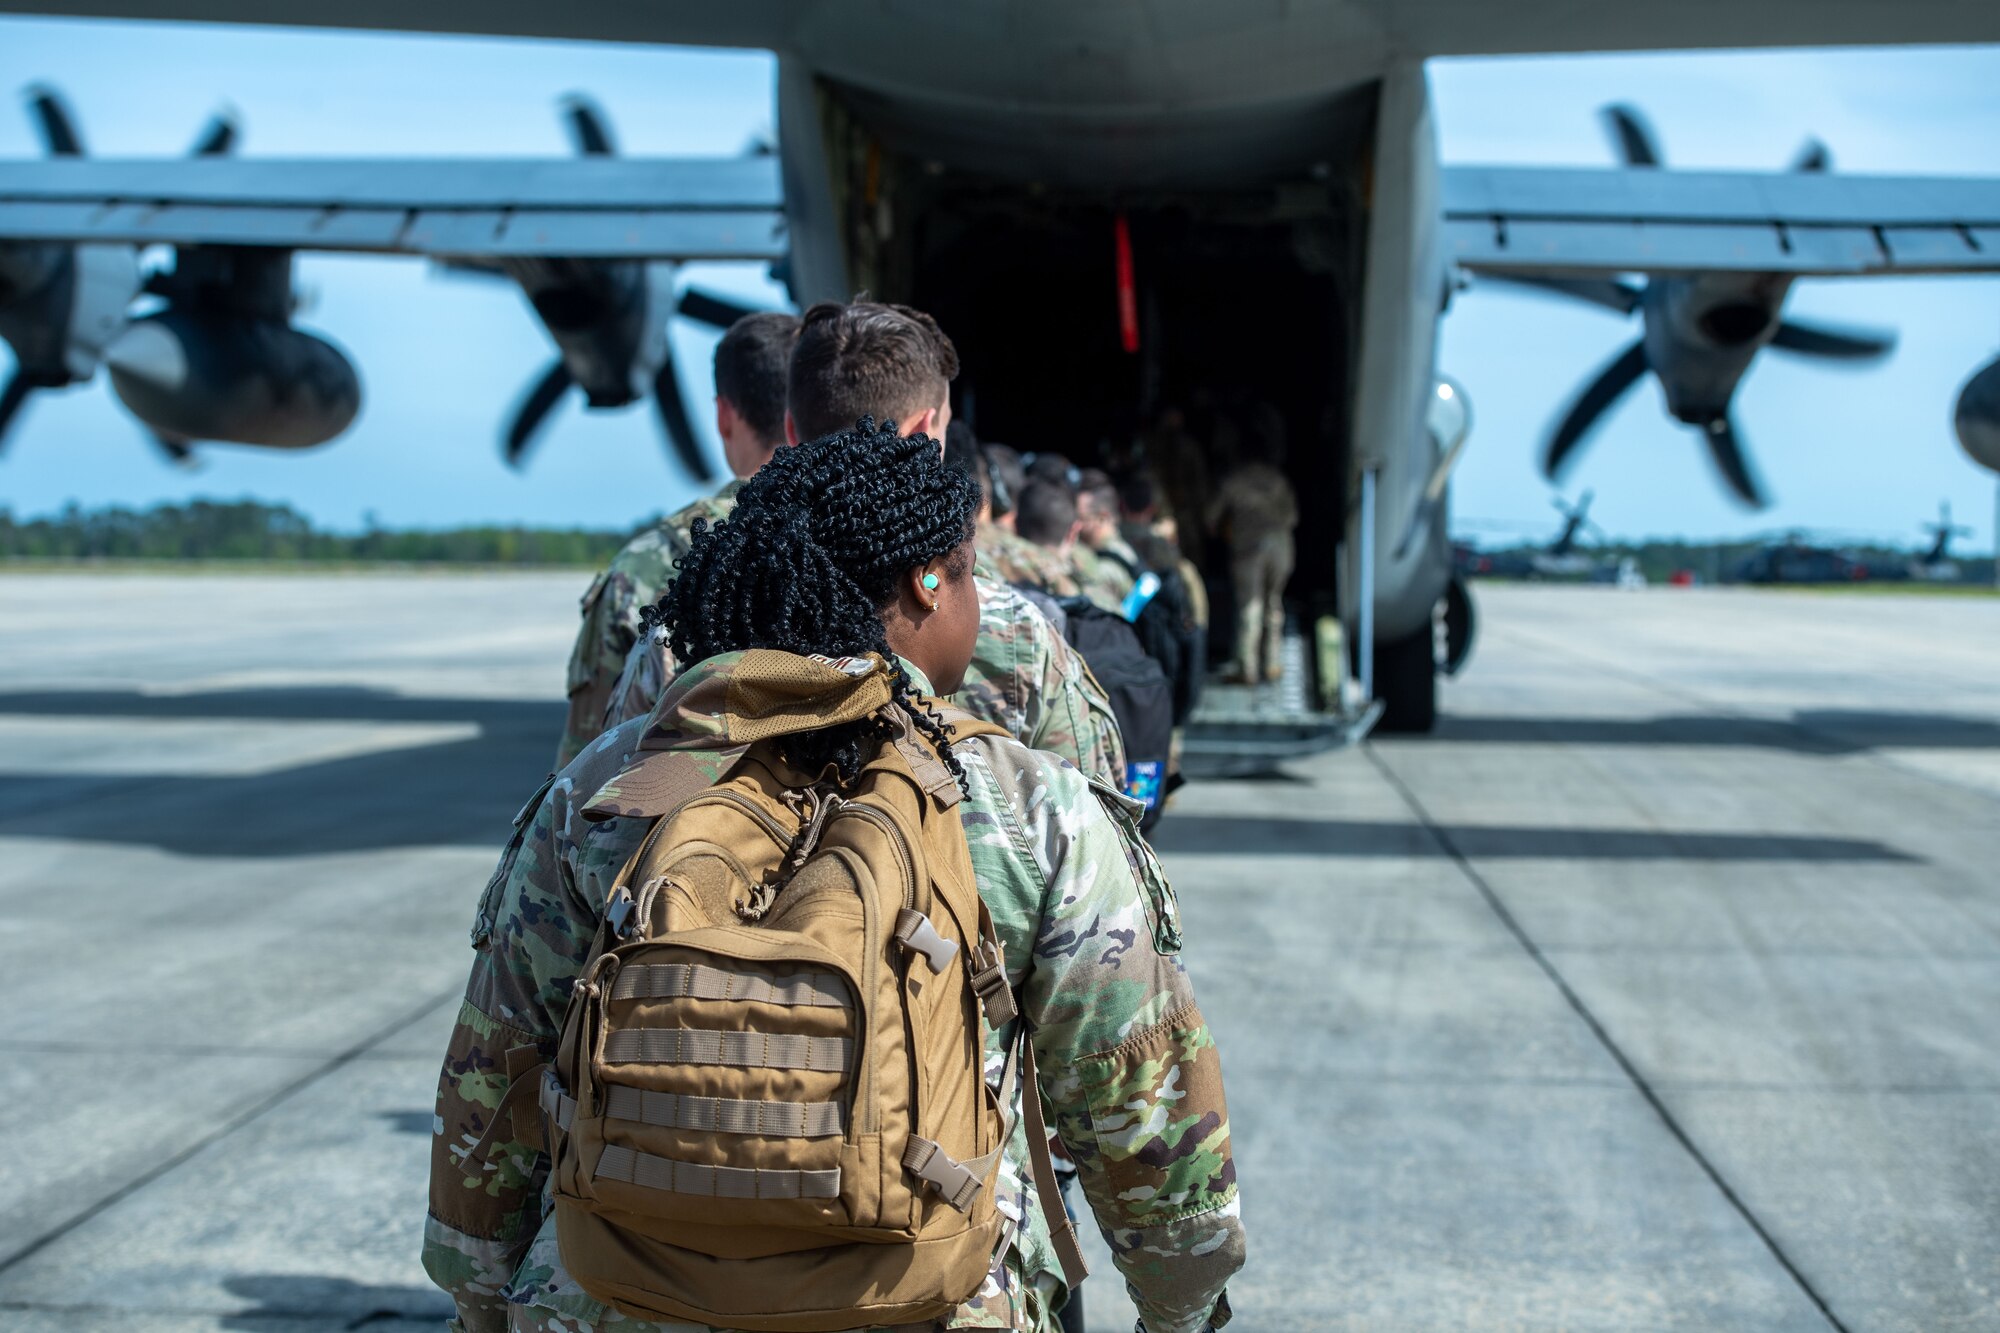 U.S. Air Force Airmen assigned to the 23rd Wing load an HC-130J Combat King II in preparation for Exercise Ready Tiger 24-1 at Moody Air Force Base, Georgia, April 8, 2024. During the exercise, 23rd Wing inspectors will assess Airmen’s proficiency in employing decentralized command and control concepts to execute air tasking orders in austere locations with limited communication capabilities. (U.S. Air Force photo by Airman Cade Ellis)